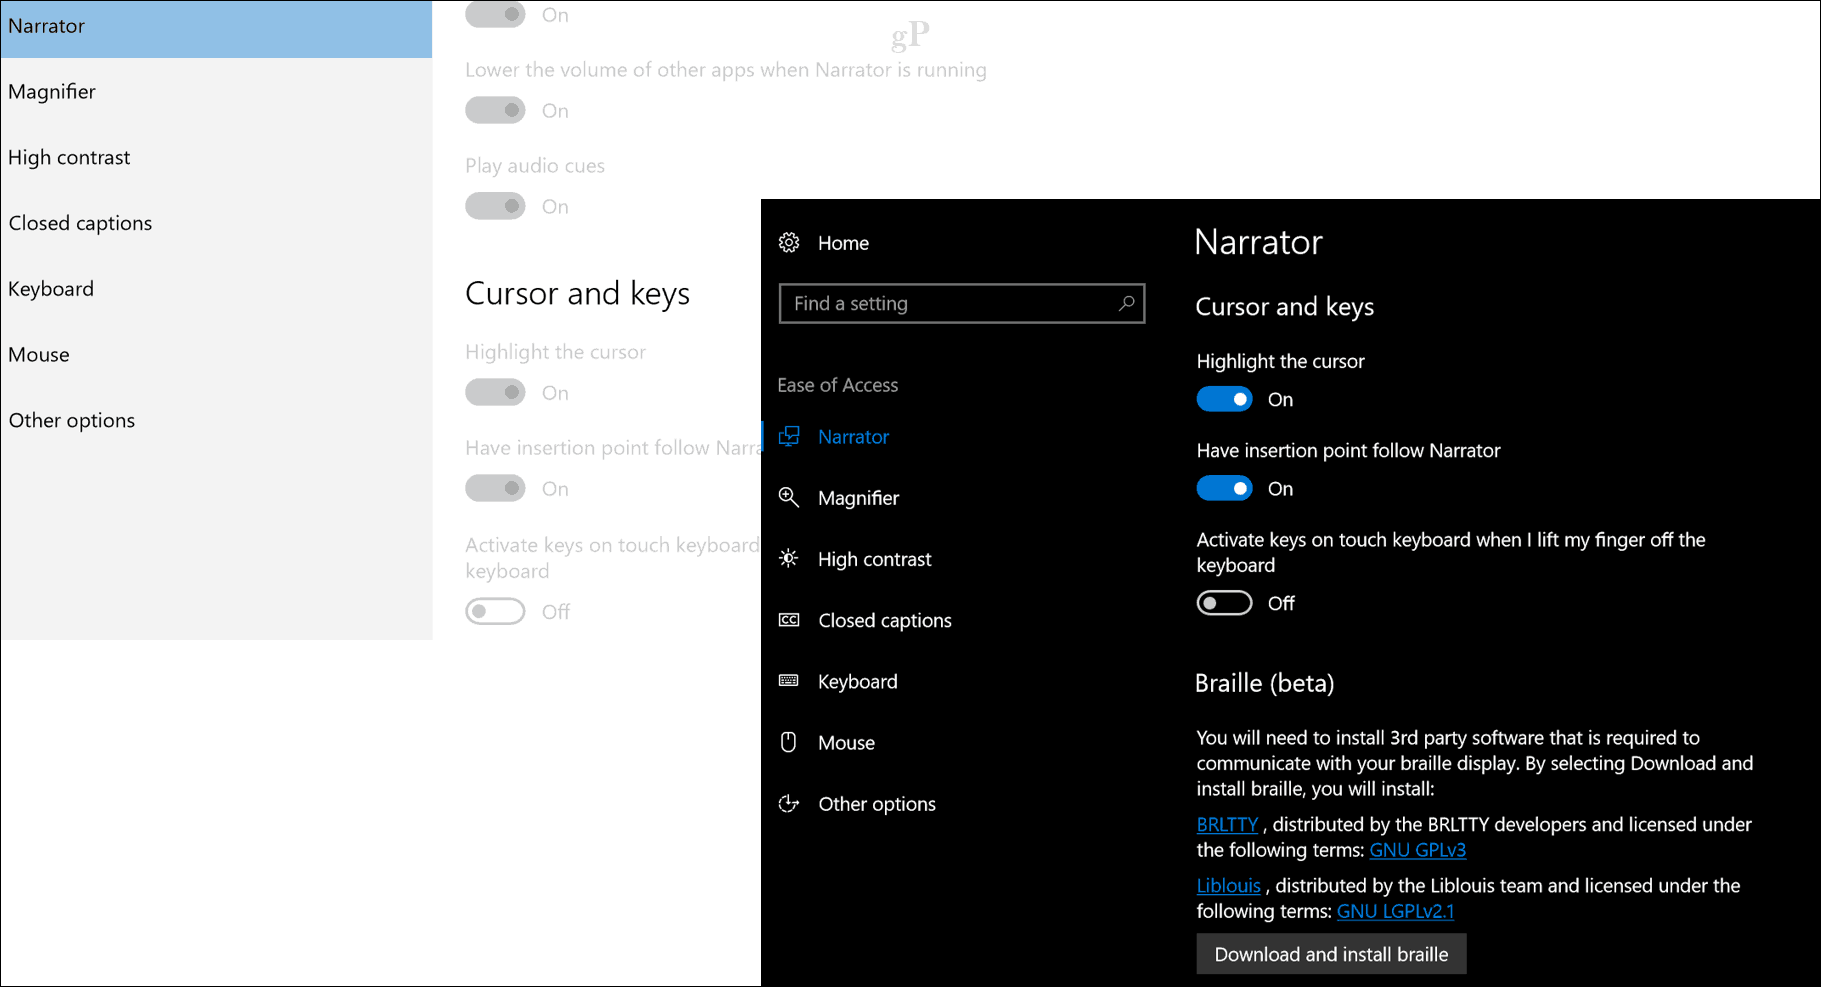 What's New and Improved in the Windows 10 Settings App?